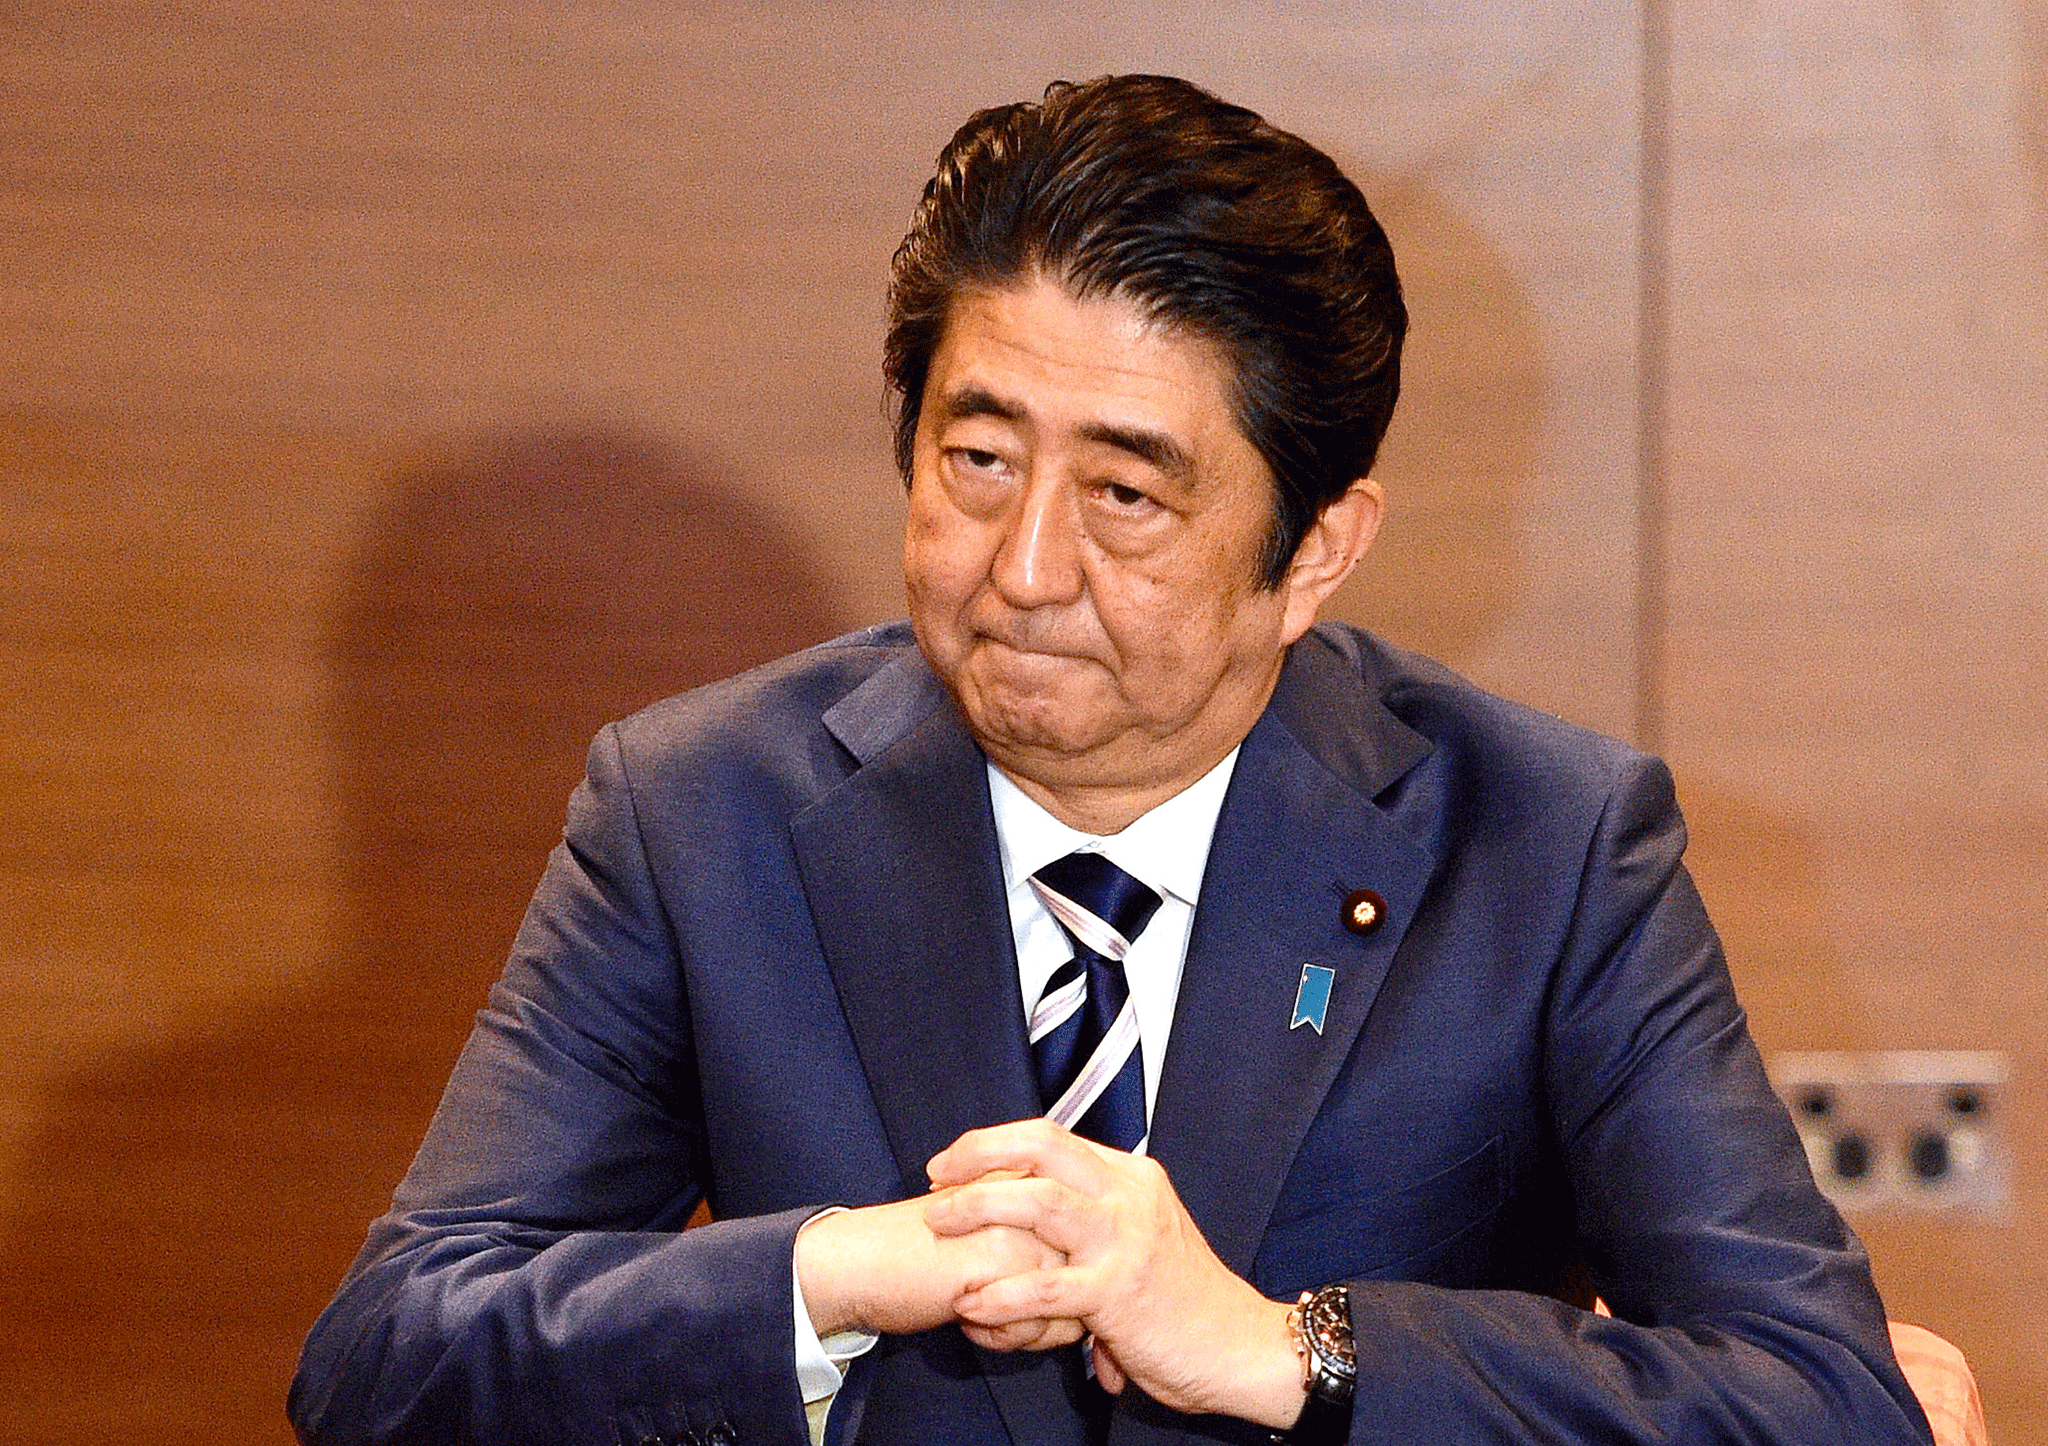 Japanese Prime Minister Shinzo Abe - Japan's Ministry of Justice, which oversees immigration, this week announced new rules governing permanent residency